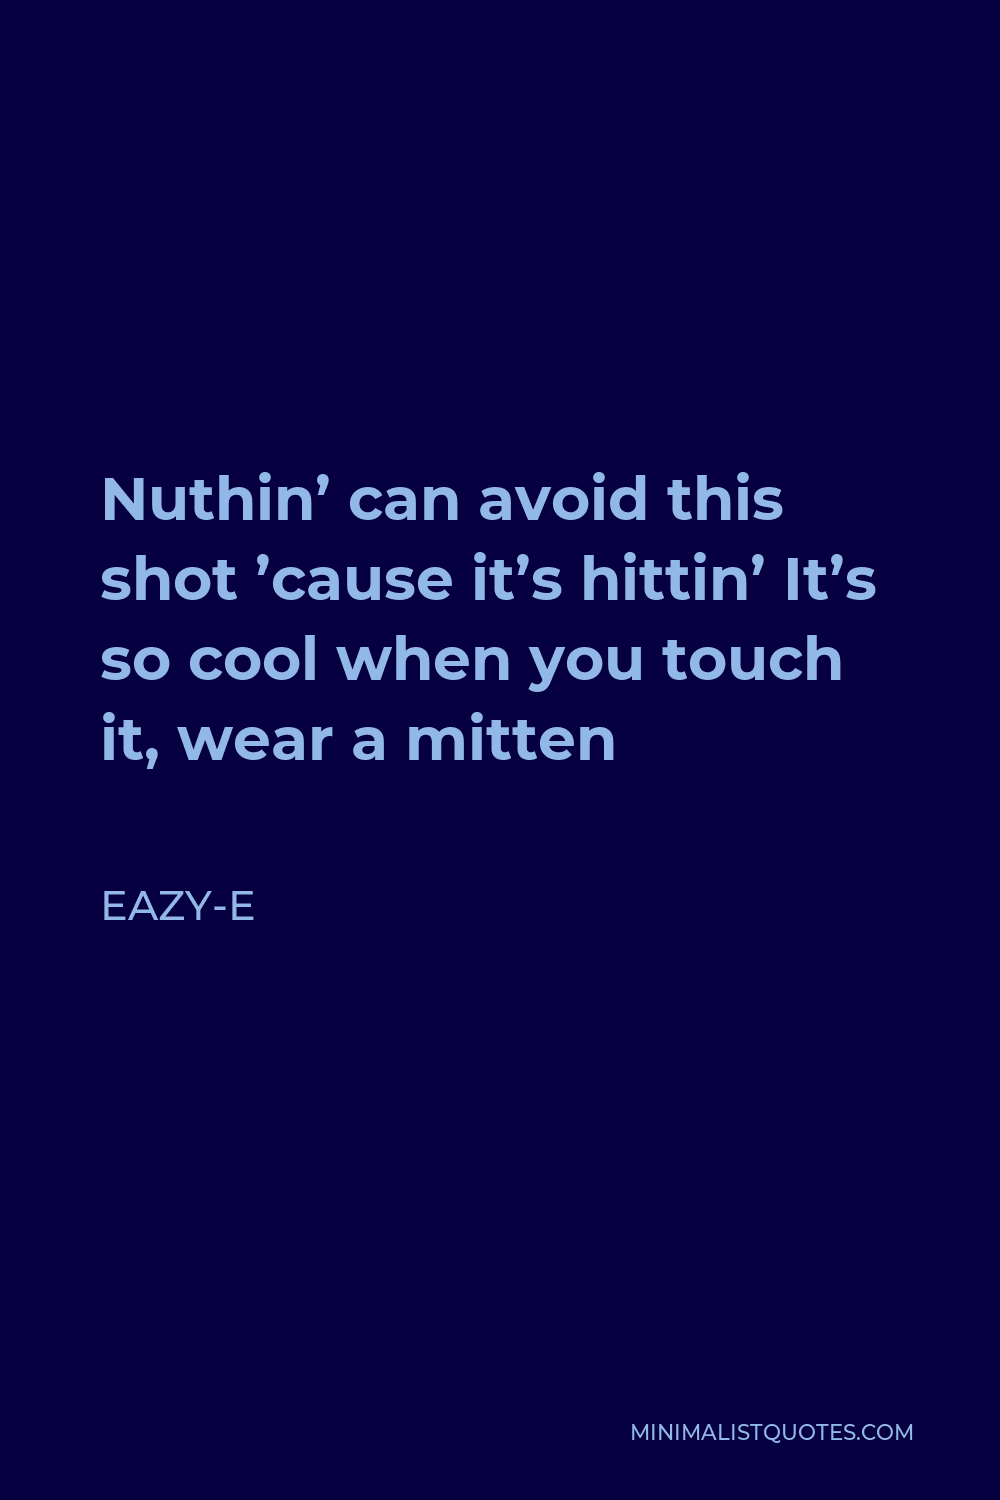 Eazy-E Quote - Nuthin’ can avoid this shot ’cause it’s hittin’ It’s so cool when you touch it, wear a mitten